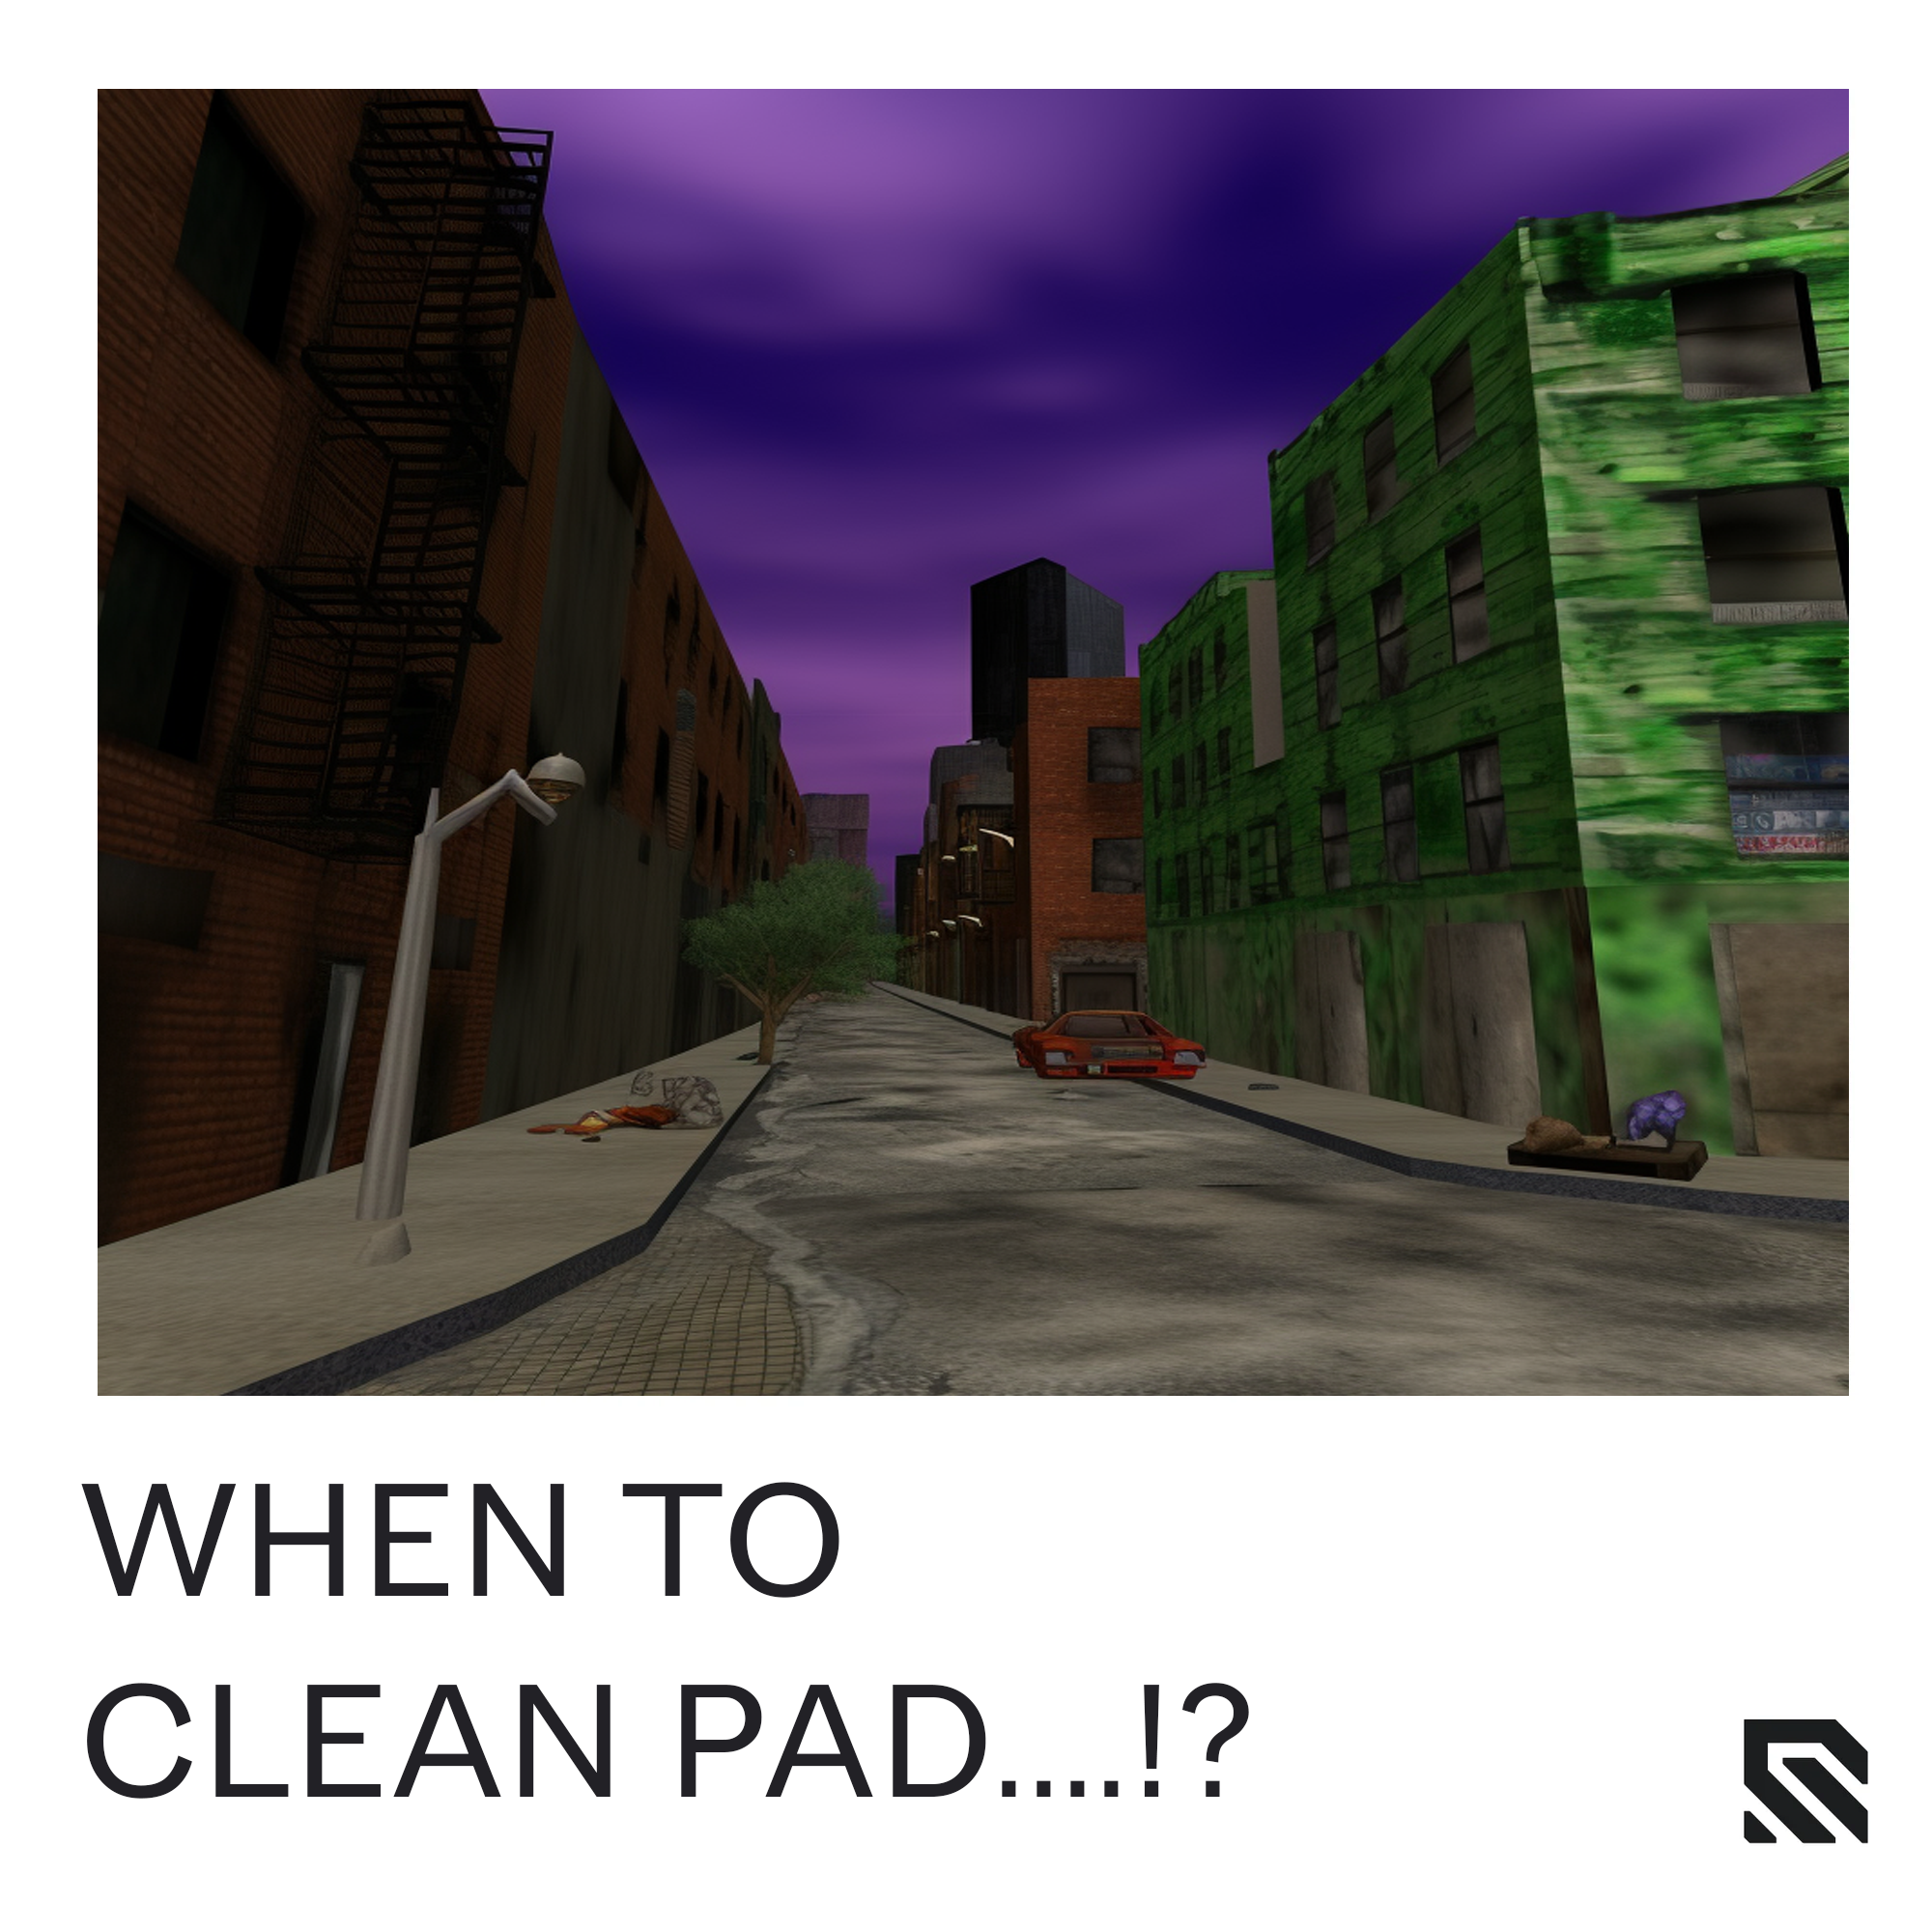 Wallhack when to clean mousepad dusty dirty city road in a digital computer game landscape from the 90s